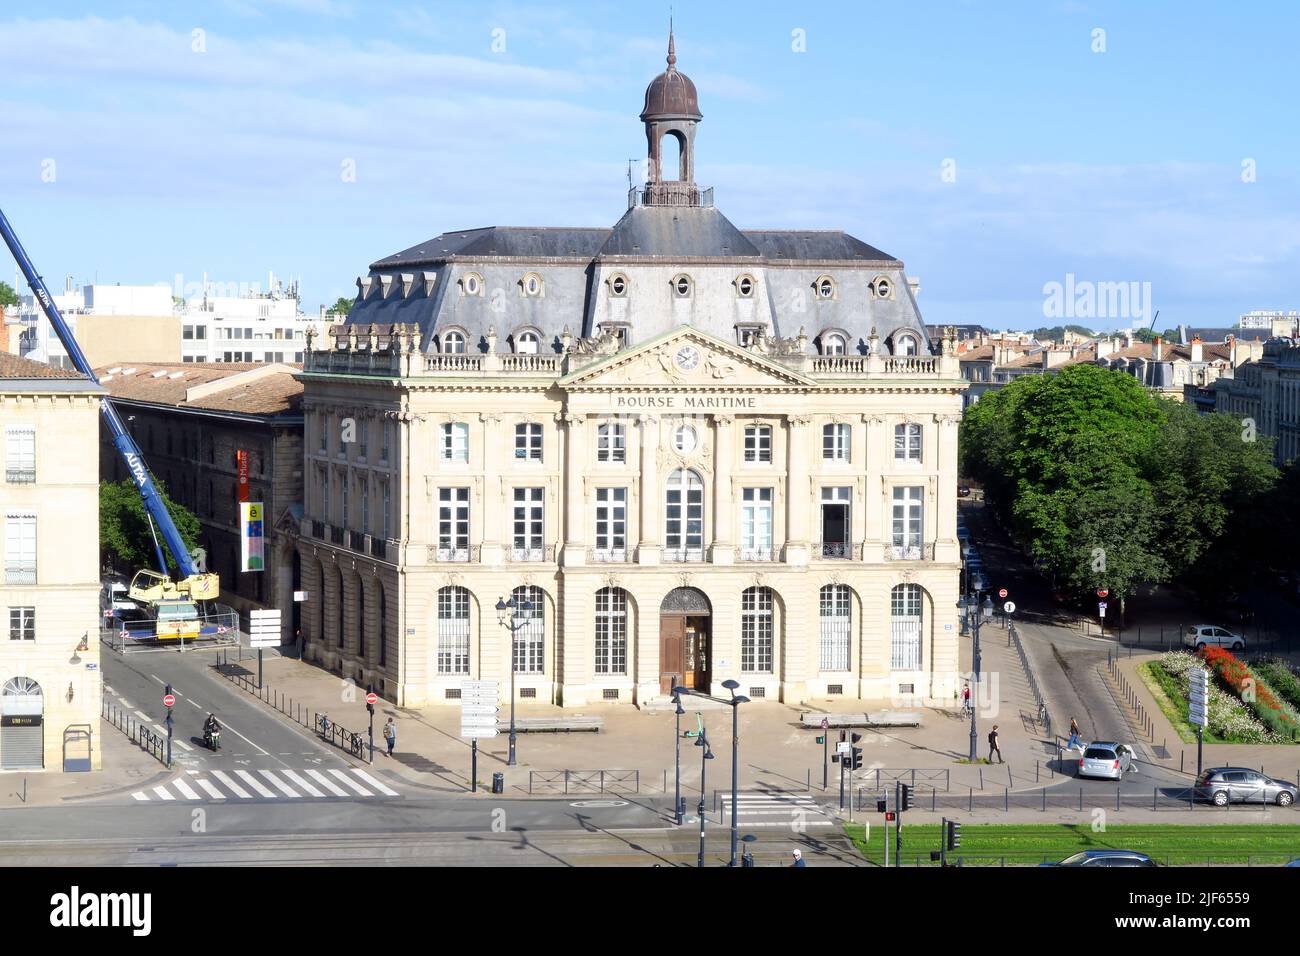 Bourse Maritime as seen from the upper decks of a cruise ship berthed on the Garonne River in the centre of the French city of Bordeaux Stock Photo